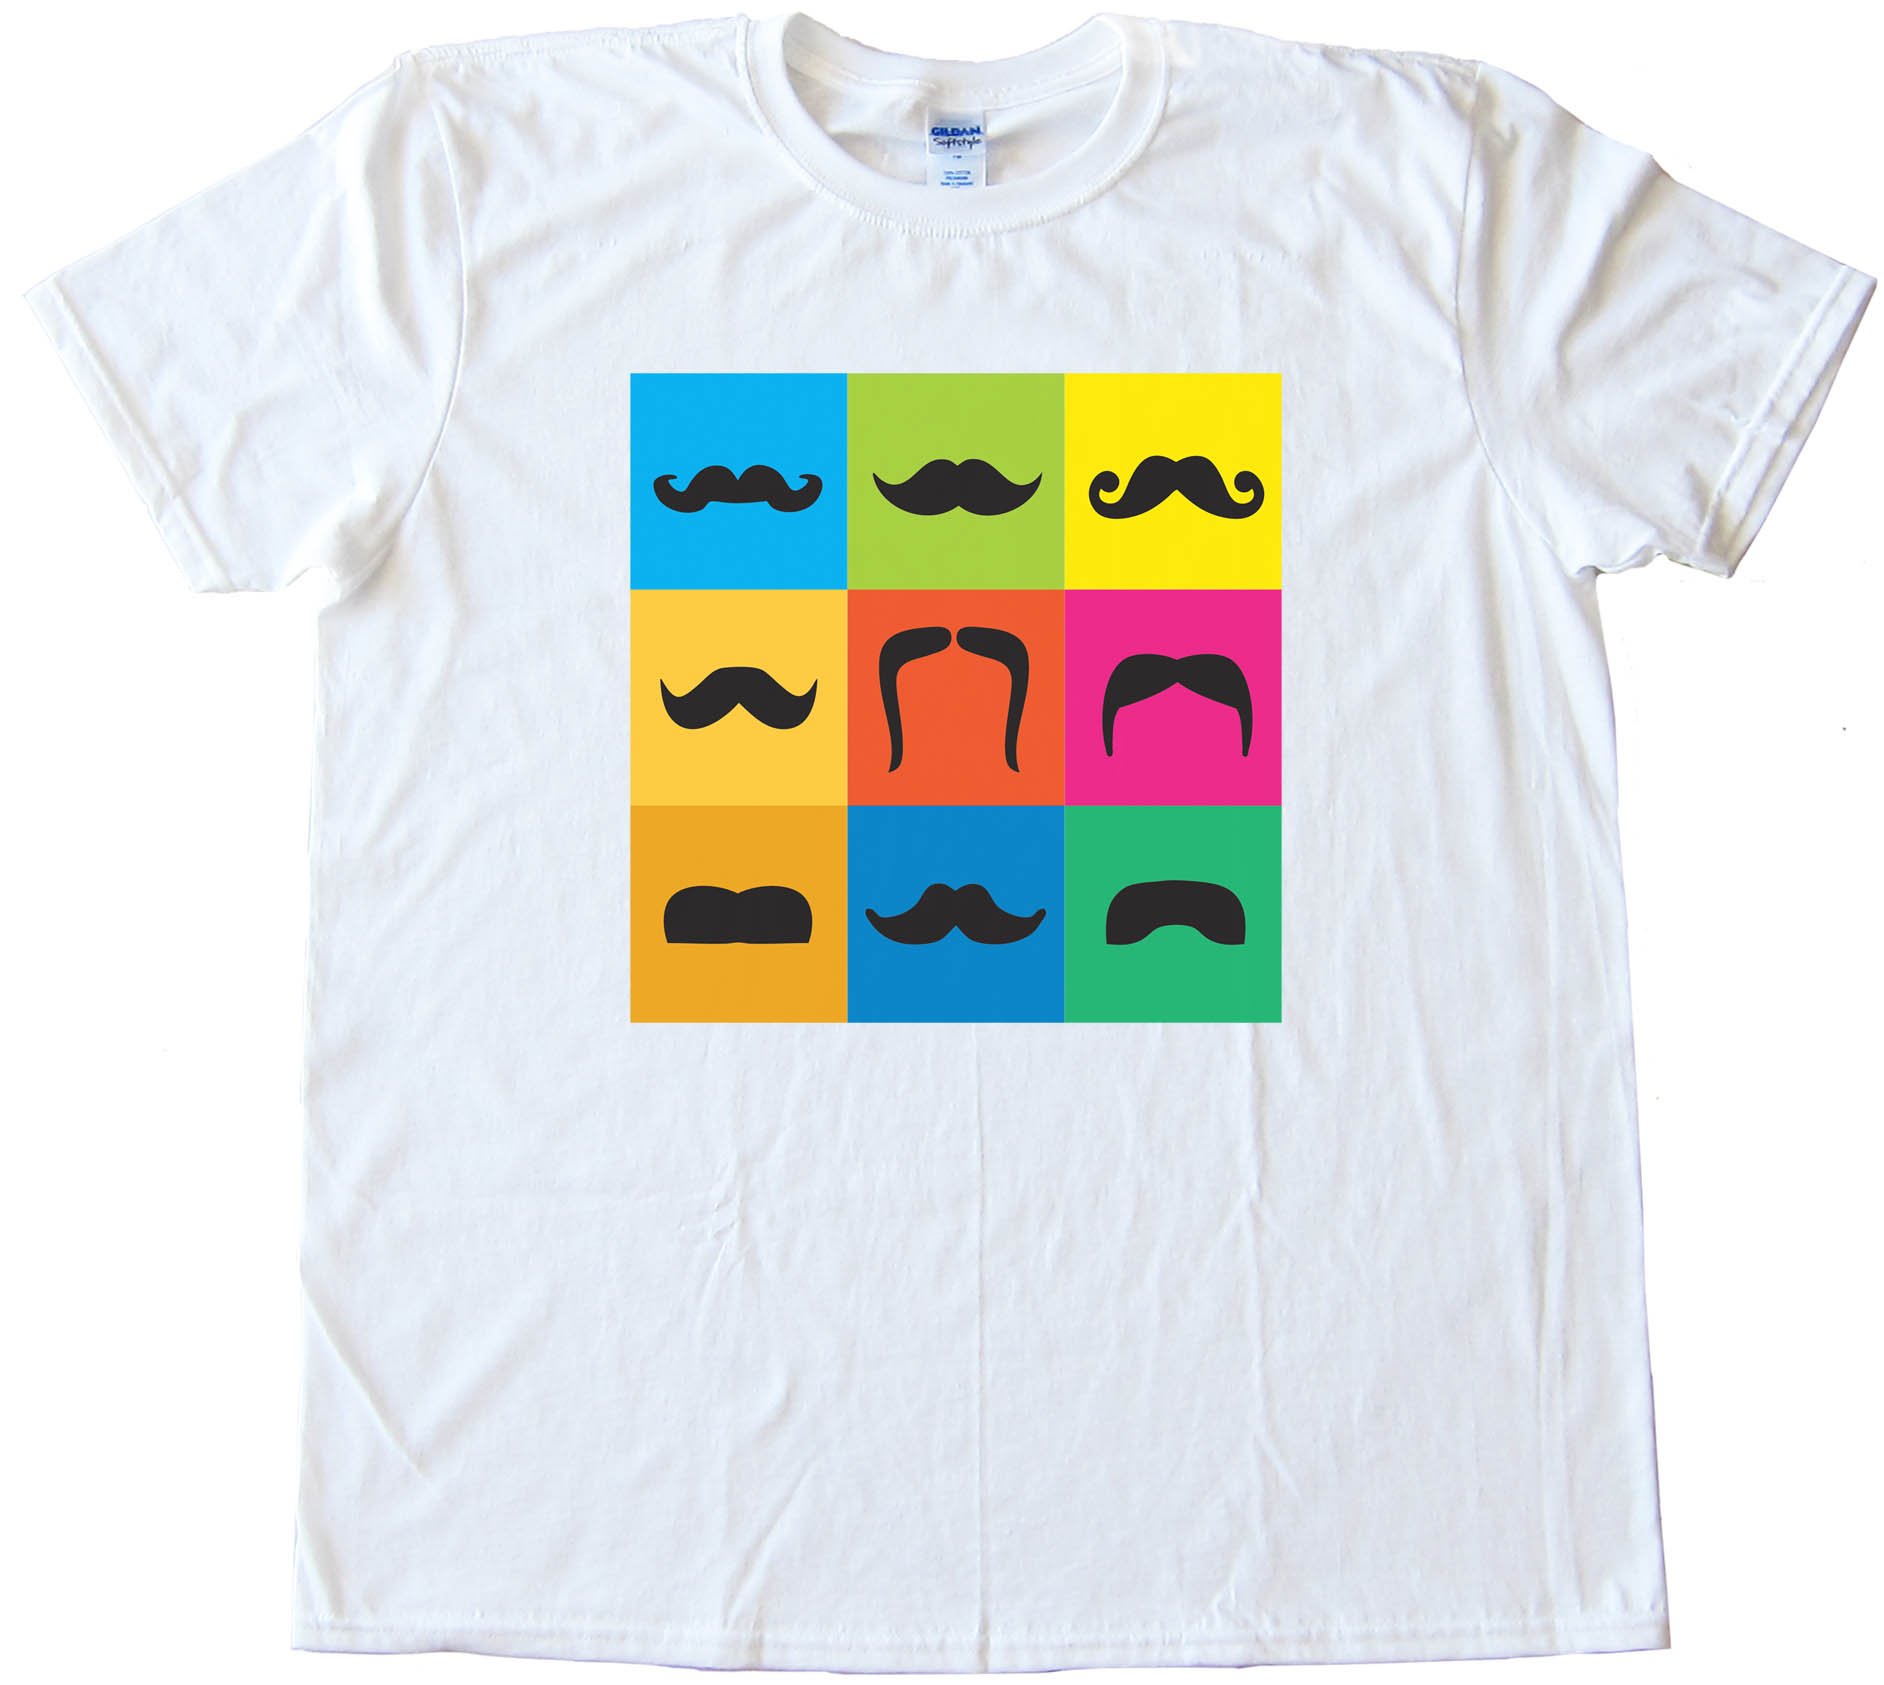 9 Mustache Styles On Colored Boxes - Movember - Tee Shirt